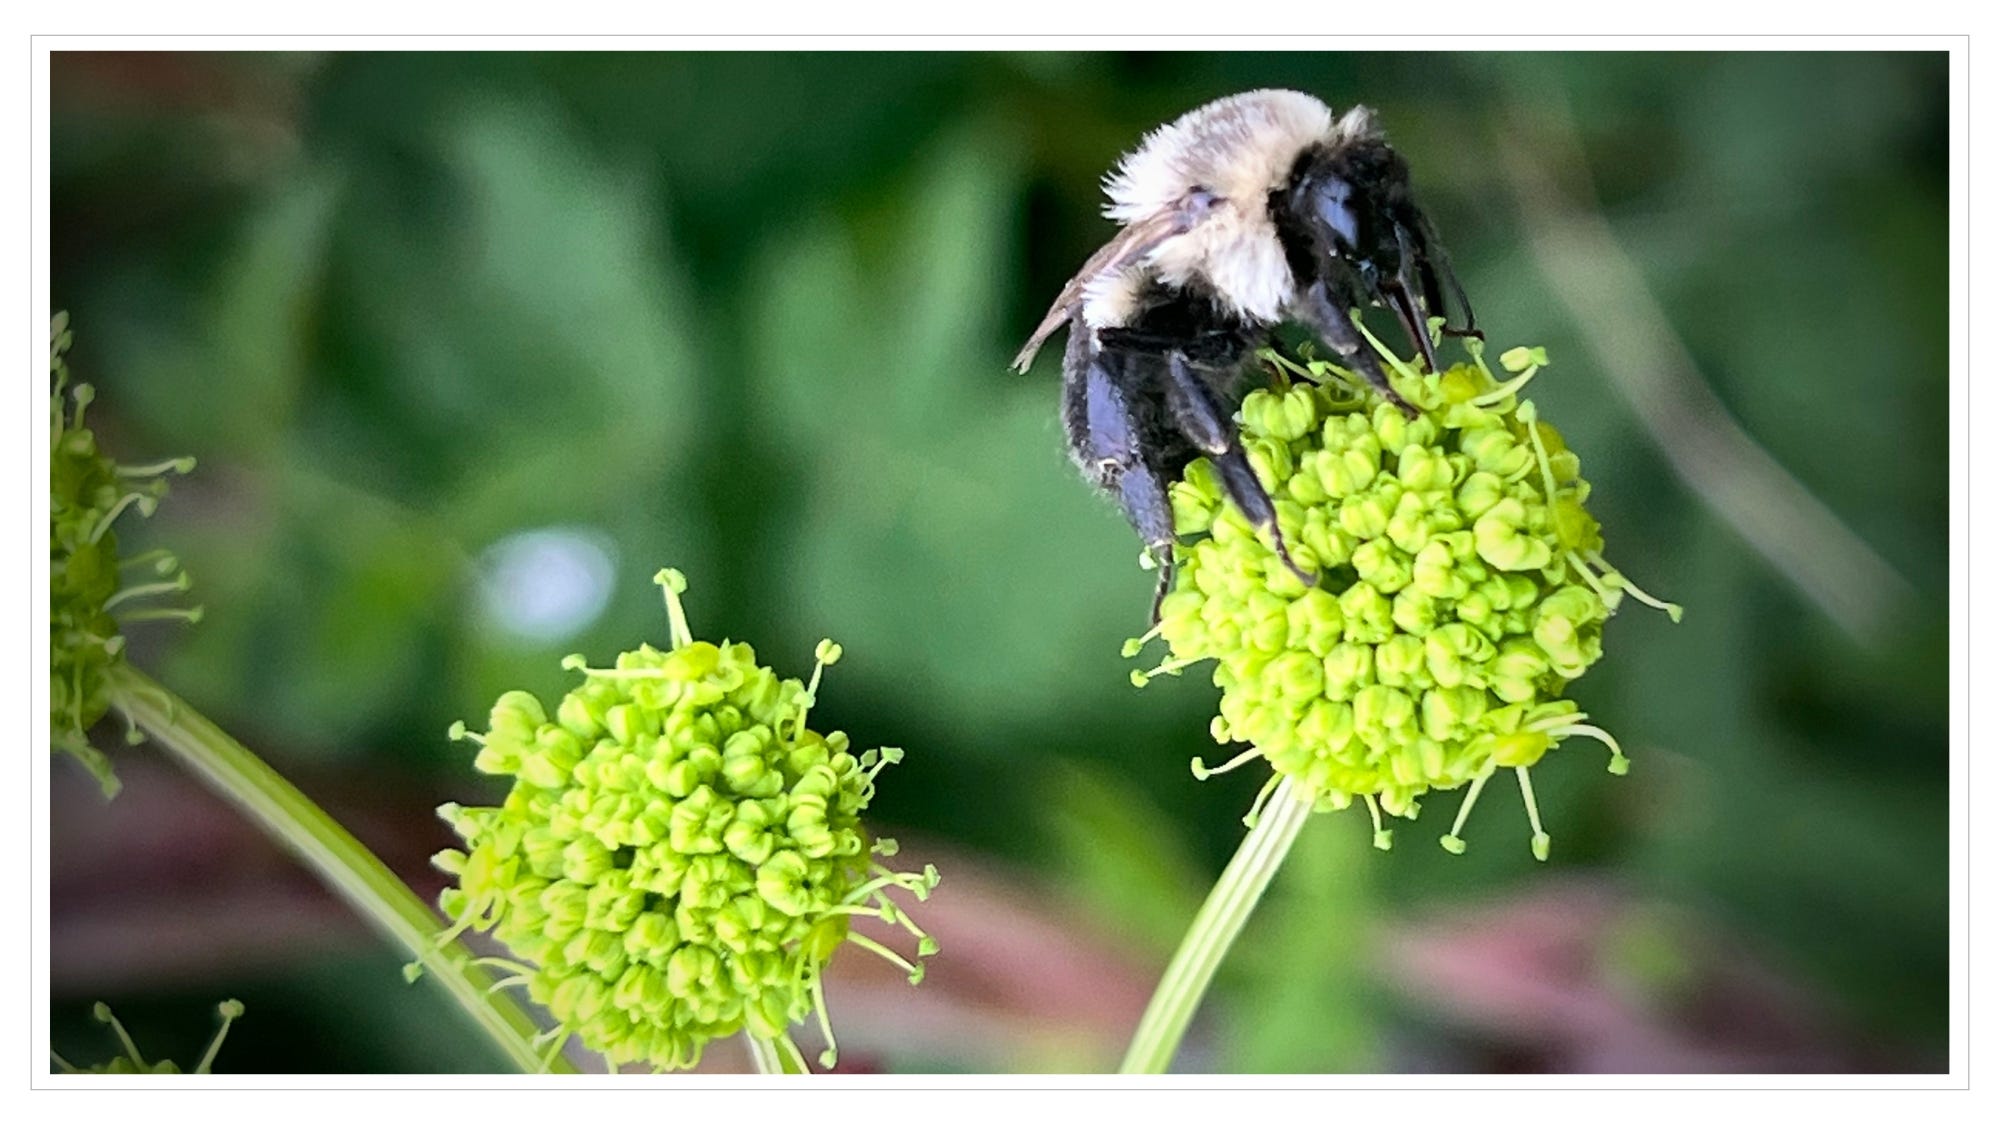 macro image, bee suckling nectar from green flower